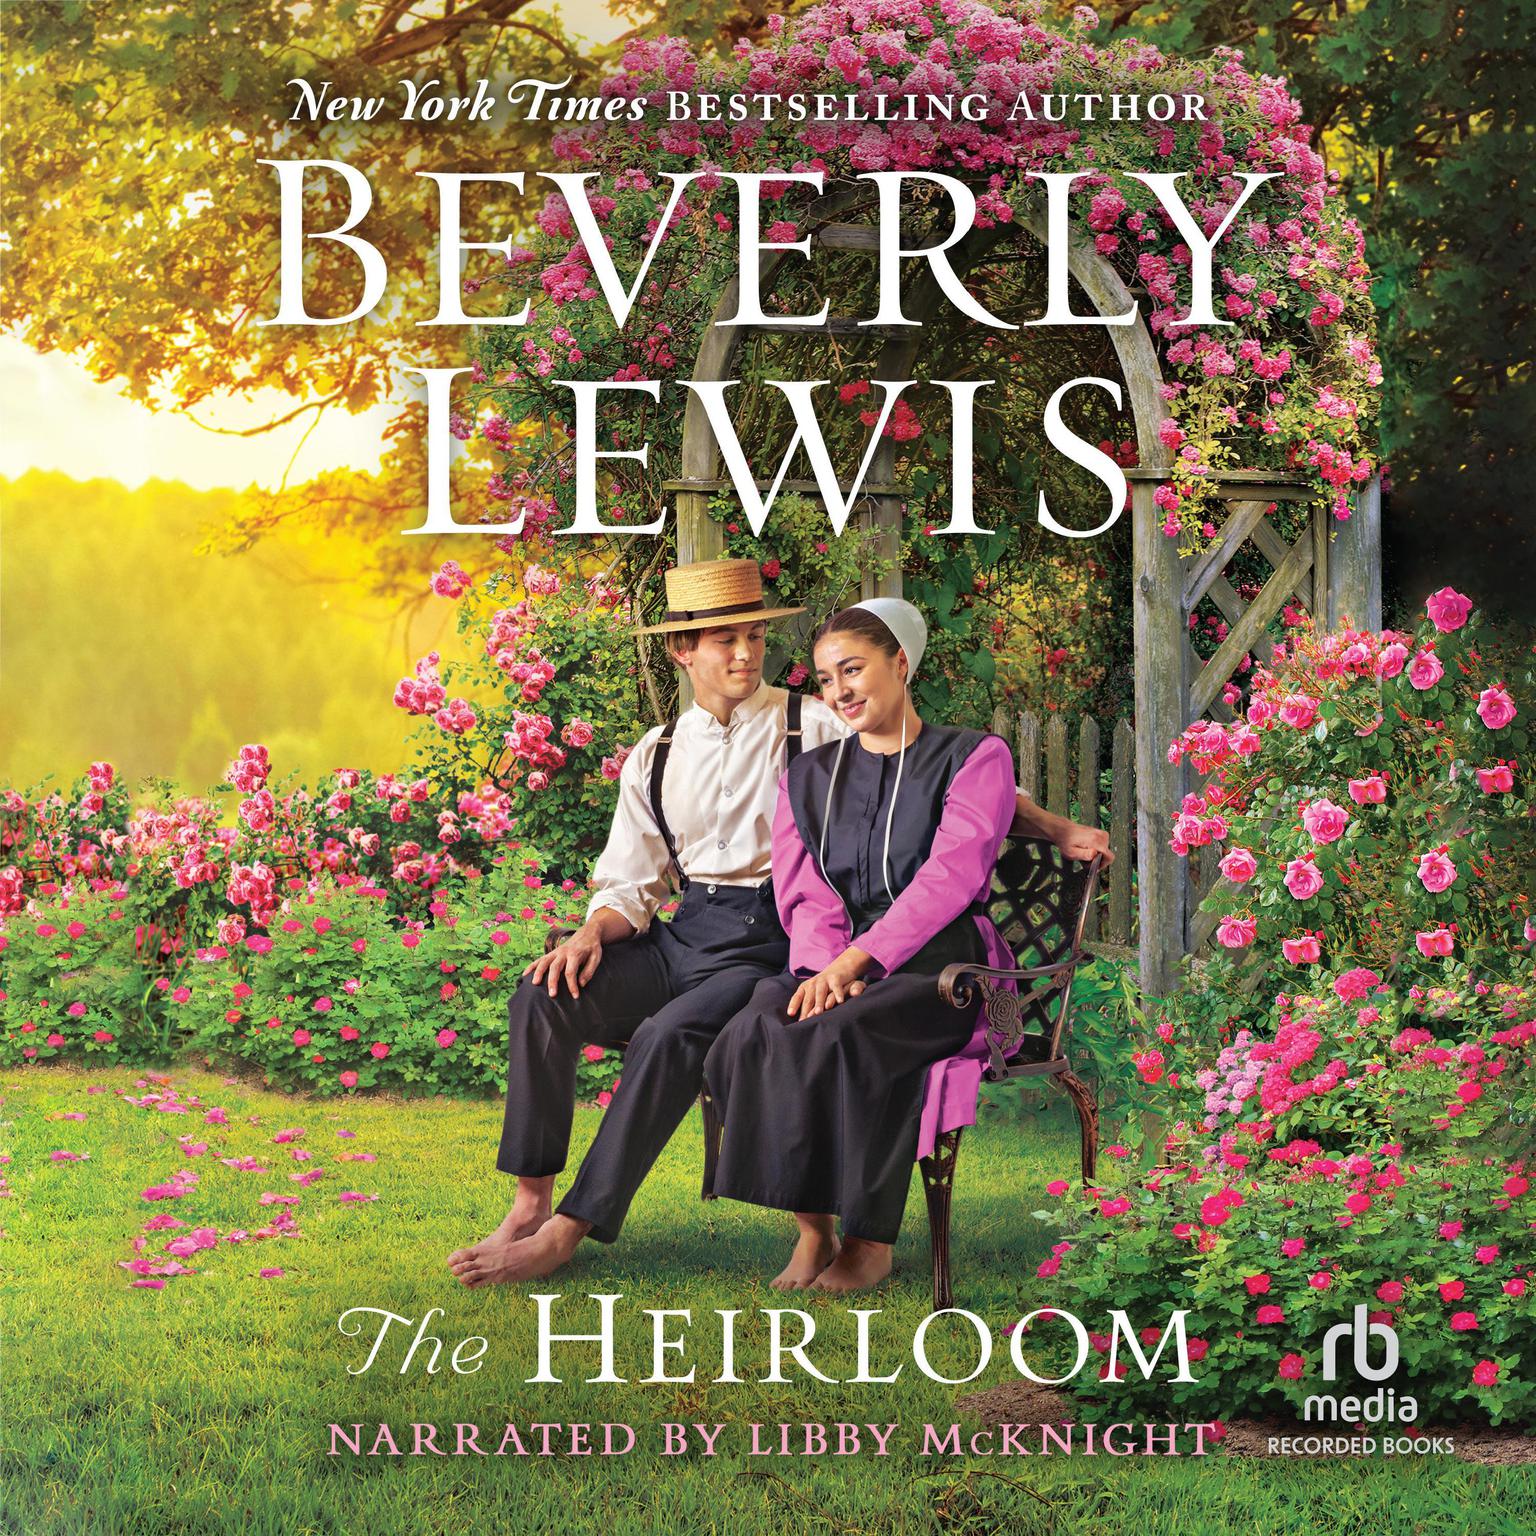 The Heirloom Audiobook, by Beverly Lewis